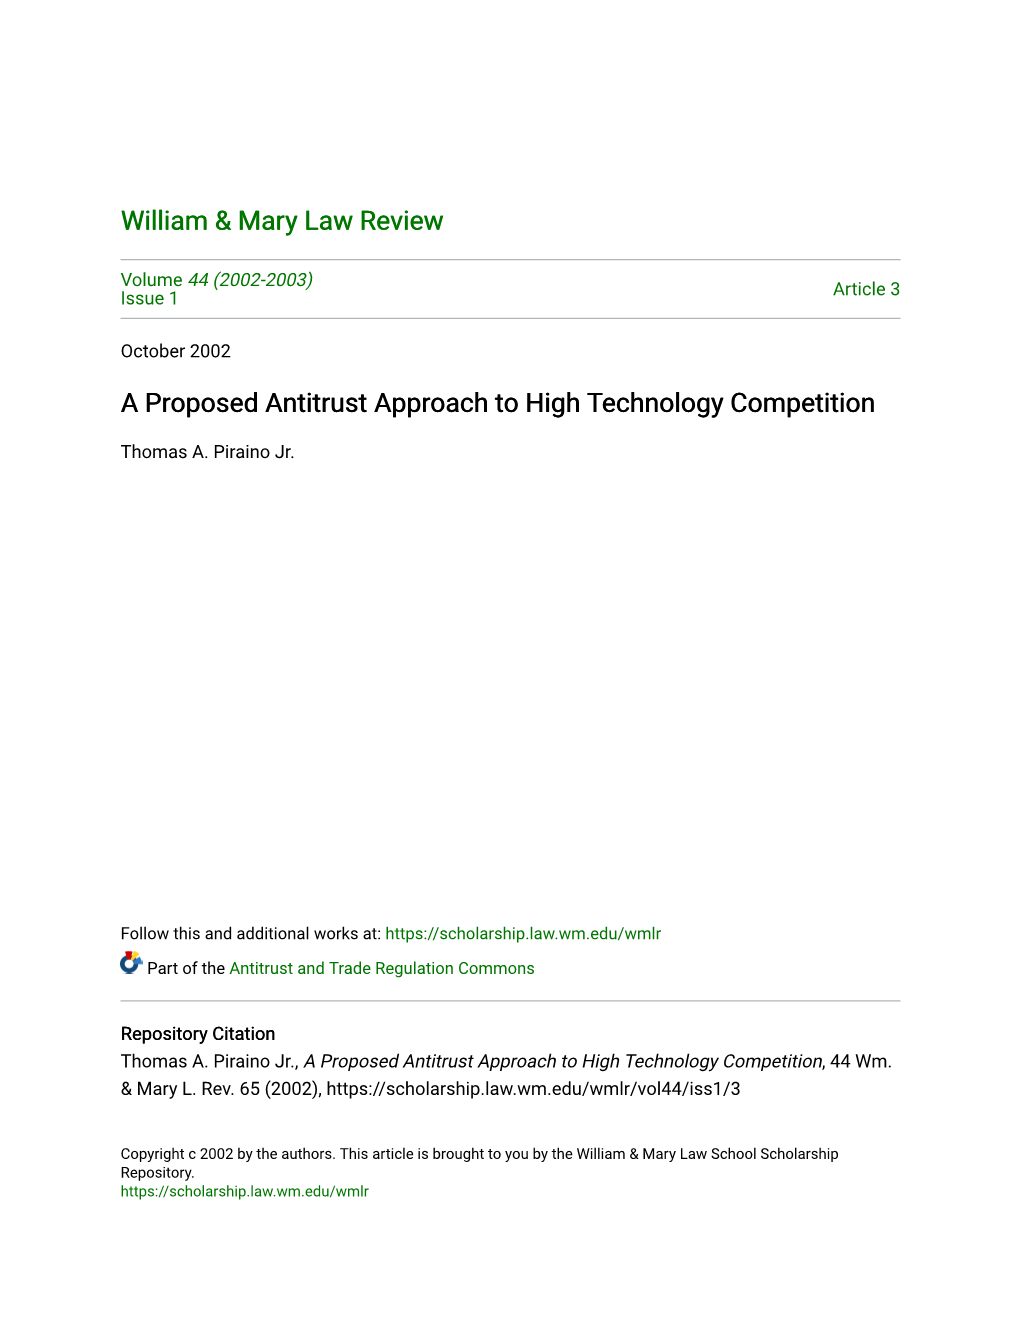 A Proposed Antitrust Approach to High Technology Competition